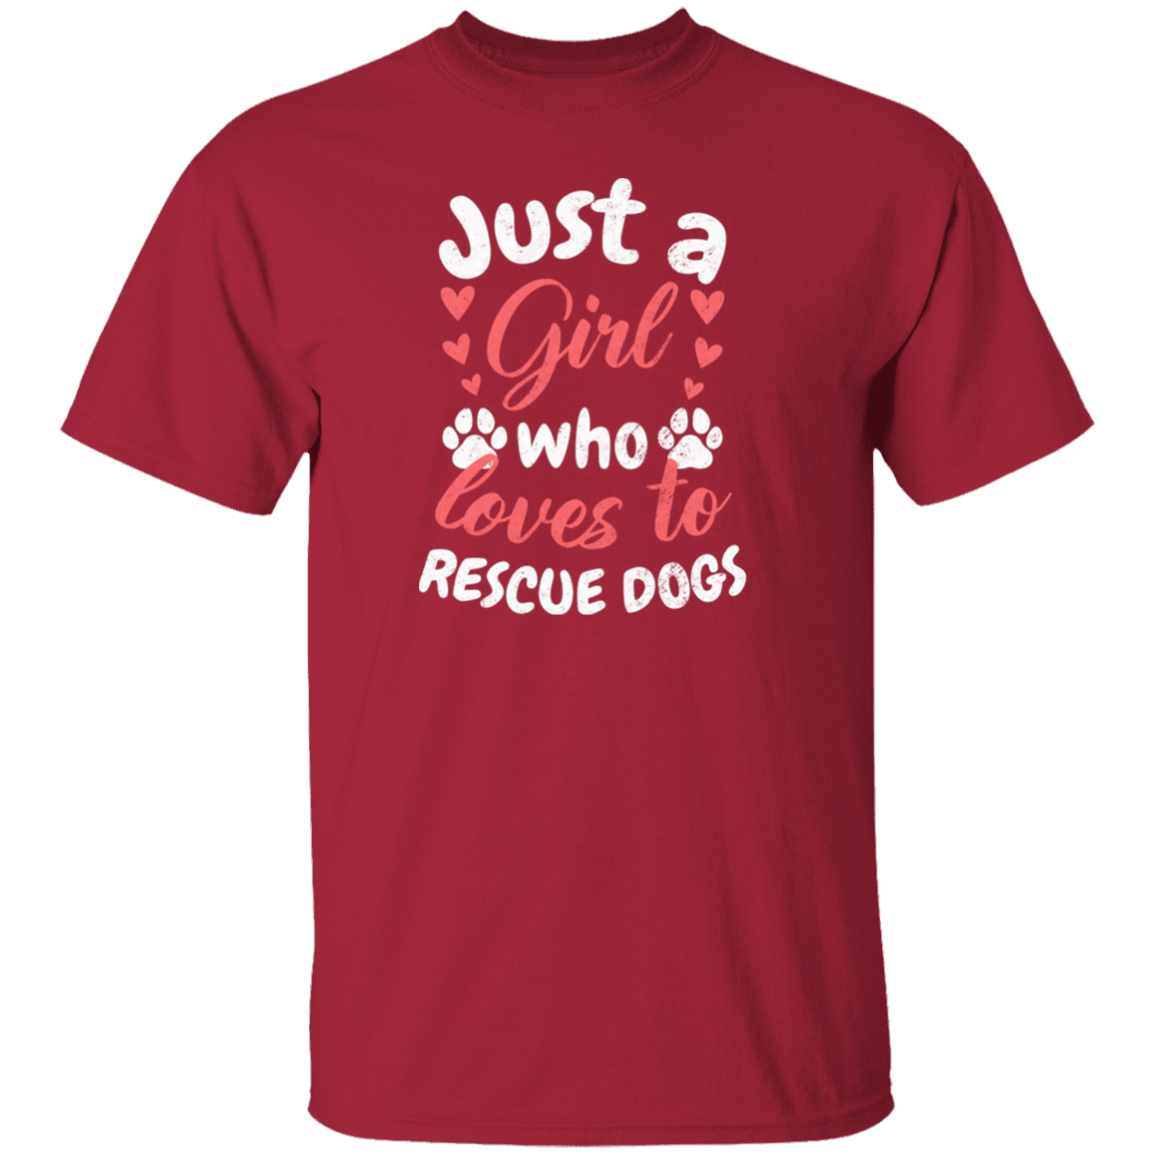 Just A Girl Who Loves To Rescue Dogs - T Shirt.